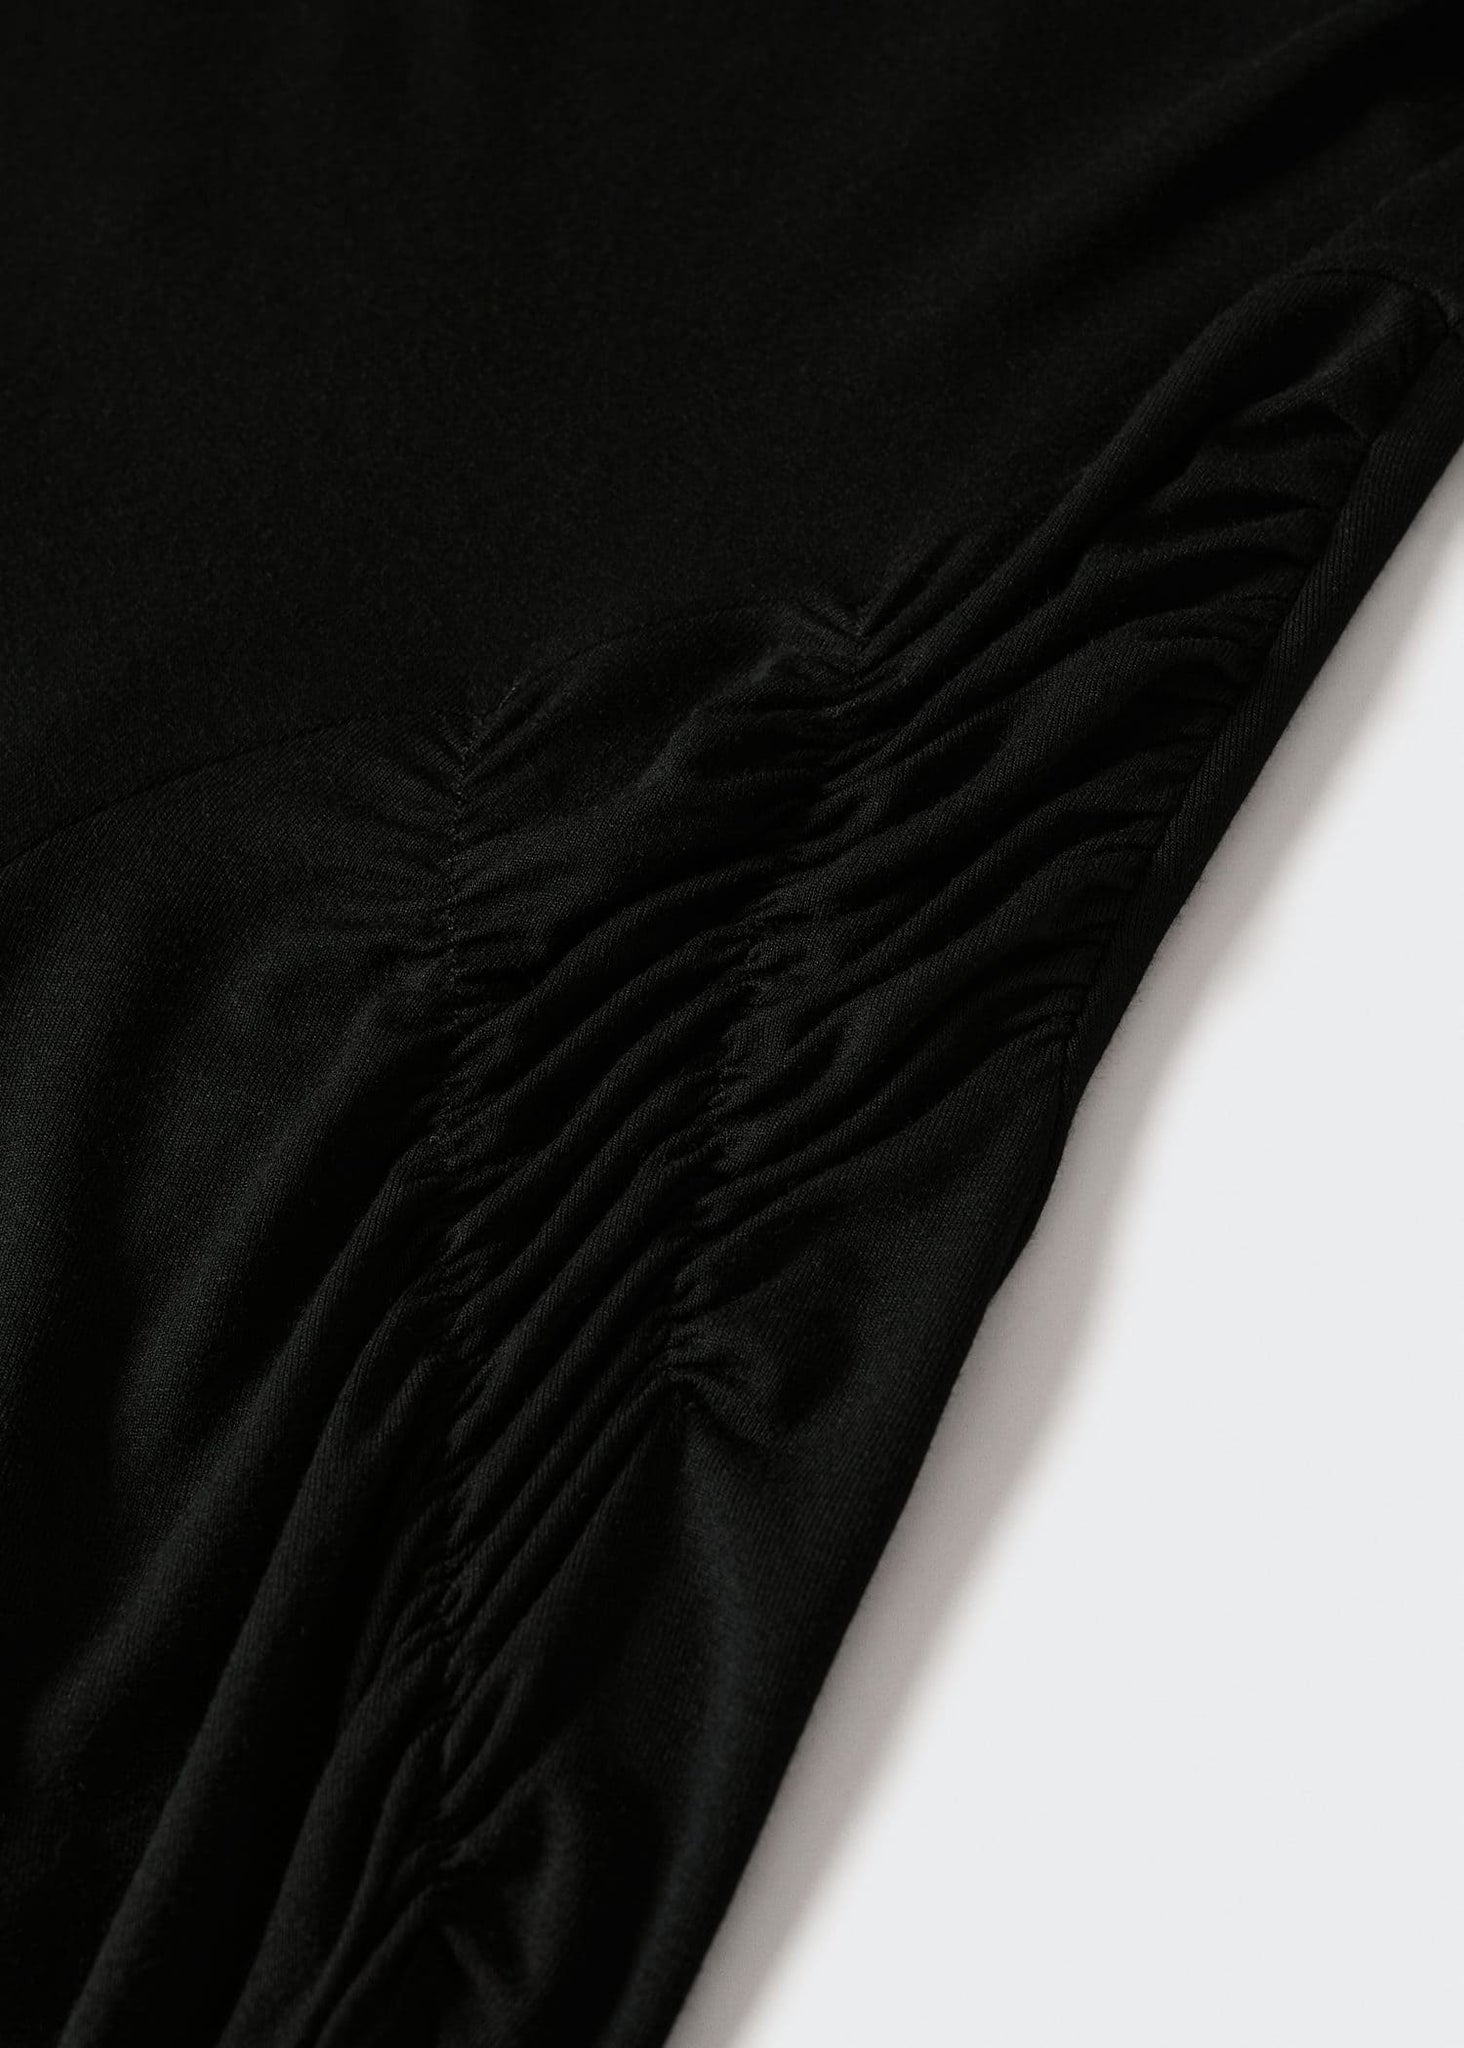 Draped knitted dress - Details of the article 8